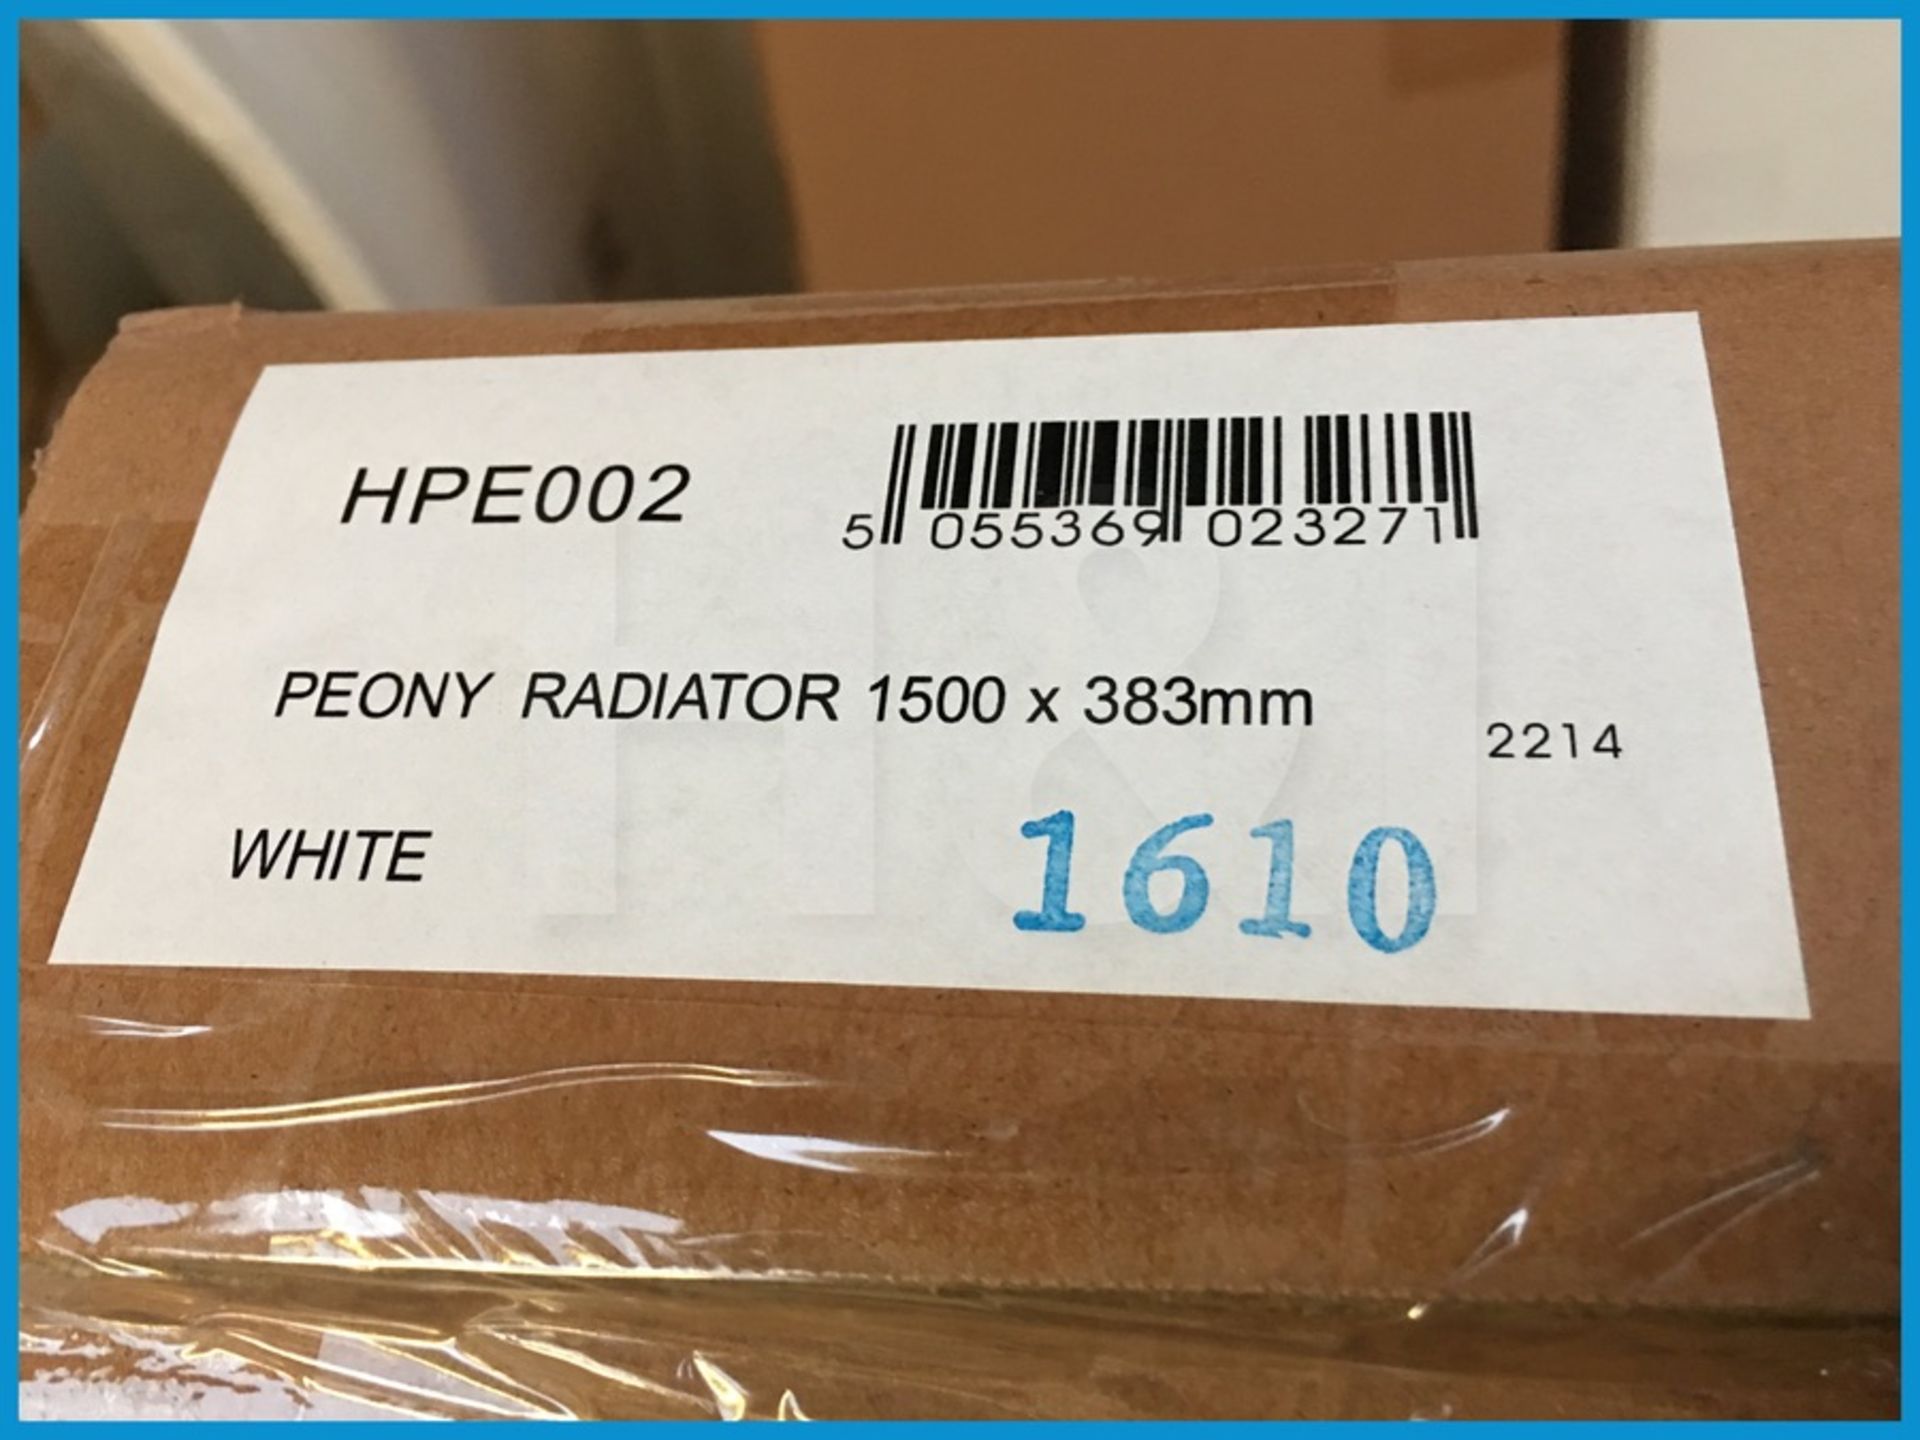 Designer Ultra HPE002 Peoni white radiator 1500x383. New and boxed. Suggested manufacturers - Image 2 of 3